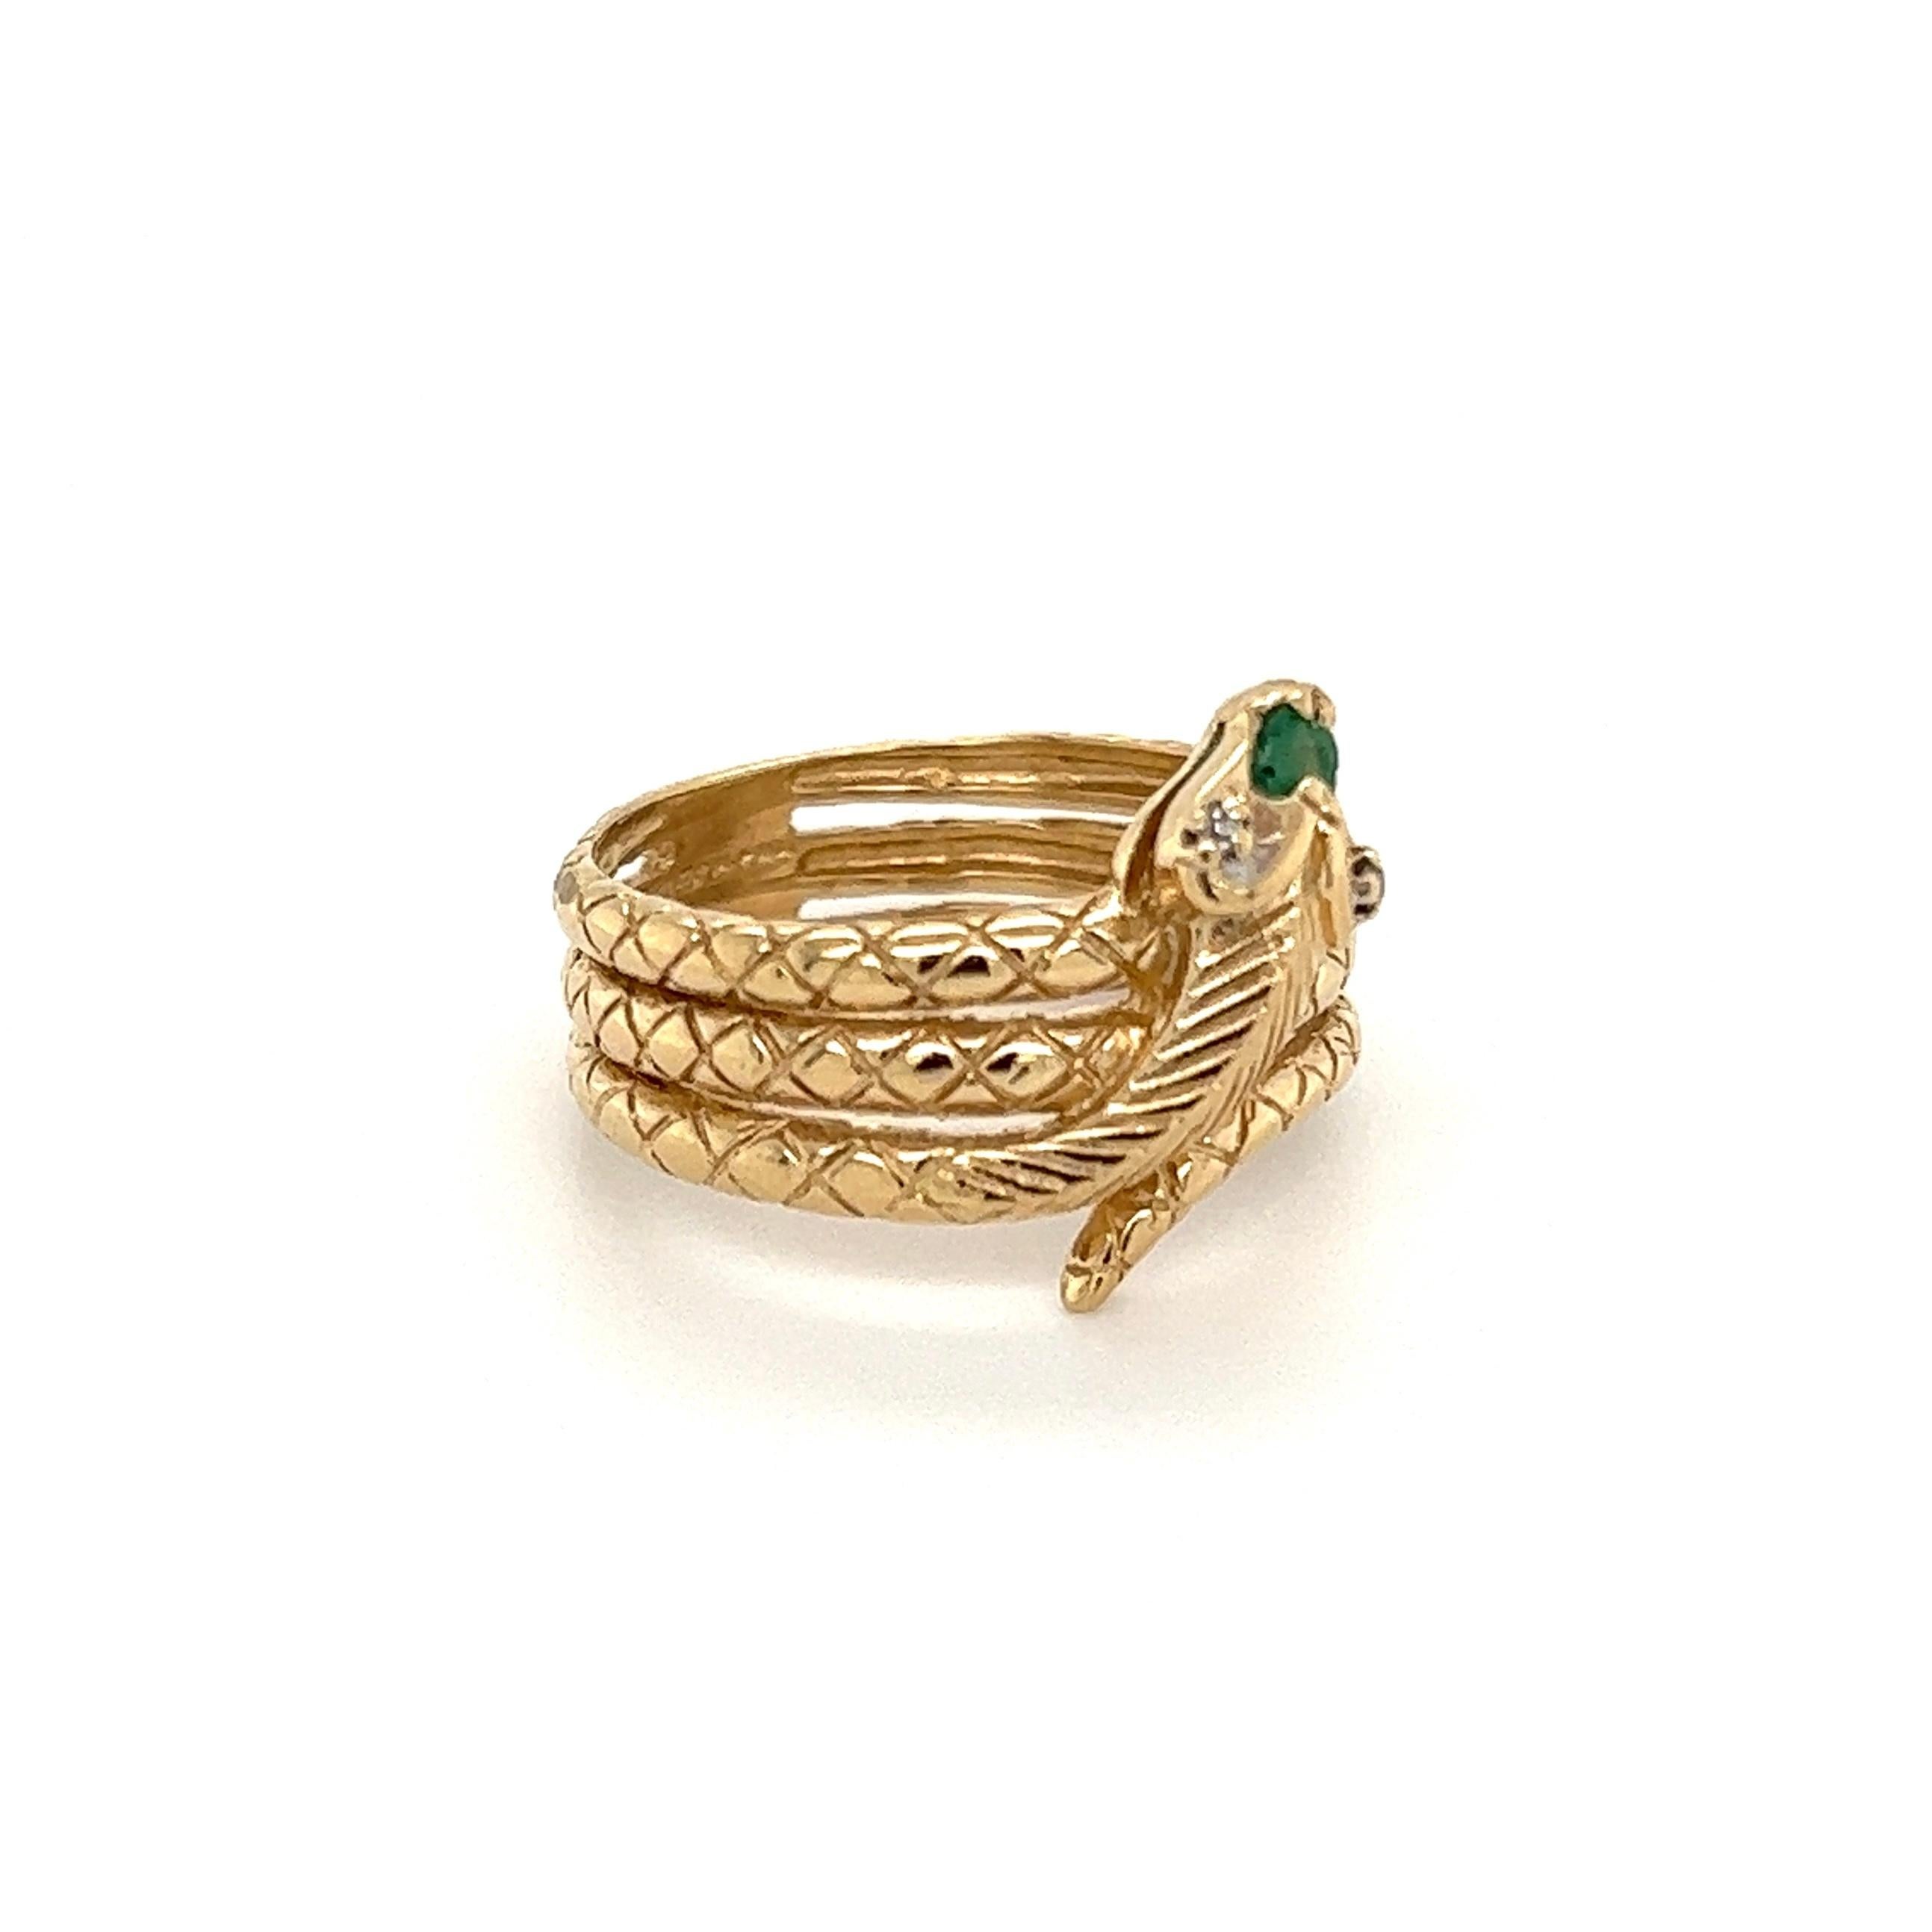 Striking Serpent Snake Ring. Hand crafted in 10K Yellow Gold with hand-engraved scales. This piece has a wonderful, old-world charm. Hand set with an Emerald and 0.01tcw Diamond Brilliant-Cut Diamond. A wonderful decadent example of the Egyptian